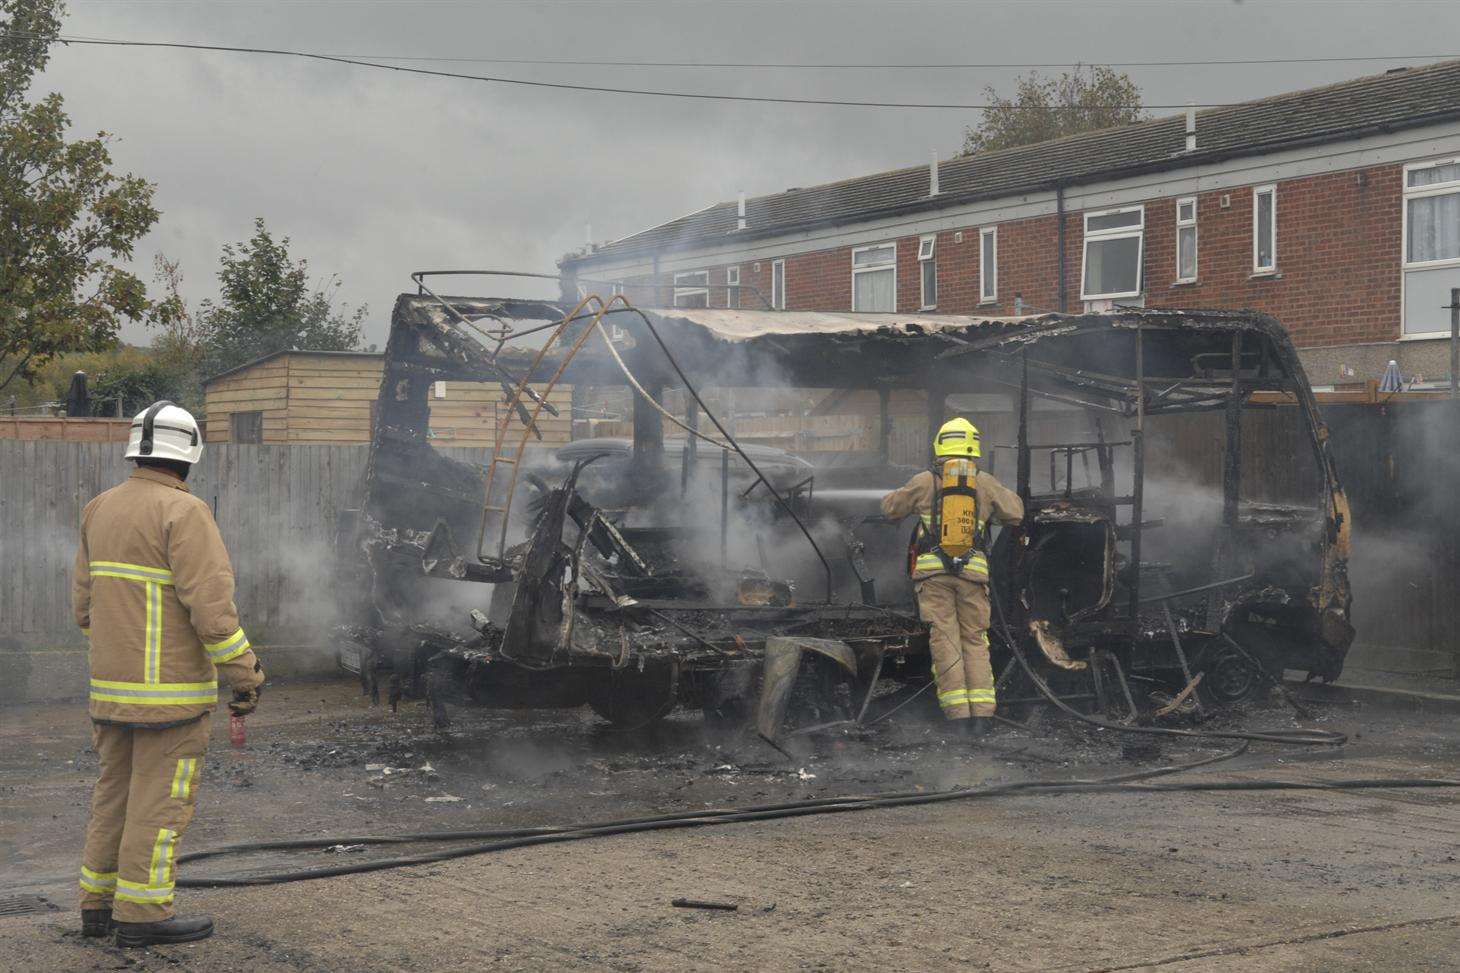 Firefighters damp down what is left of the campervan